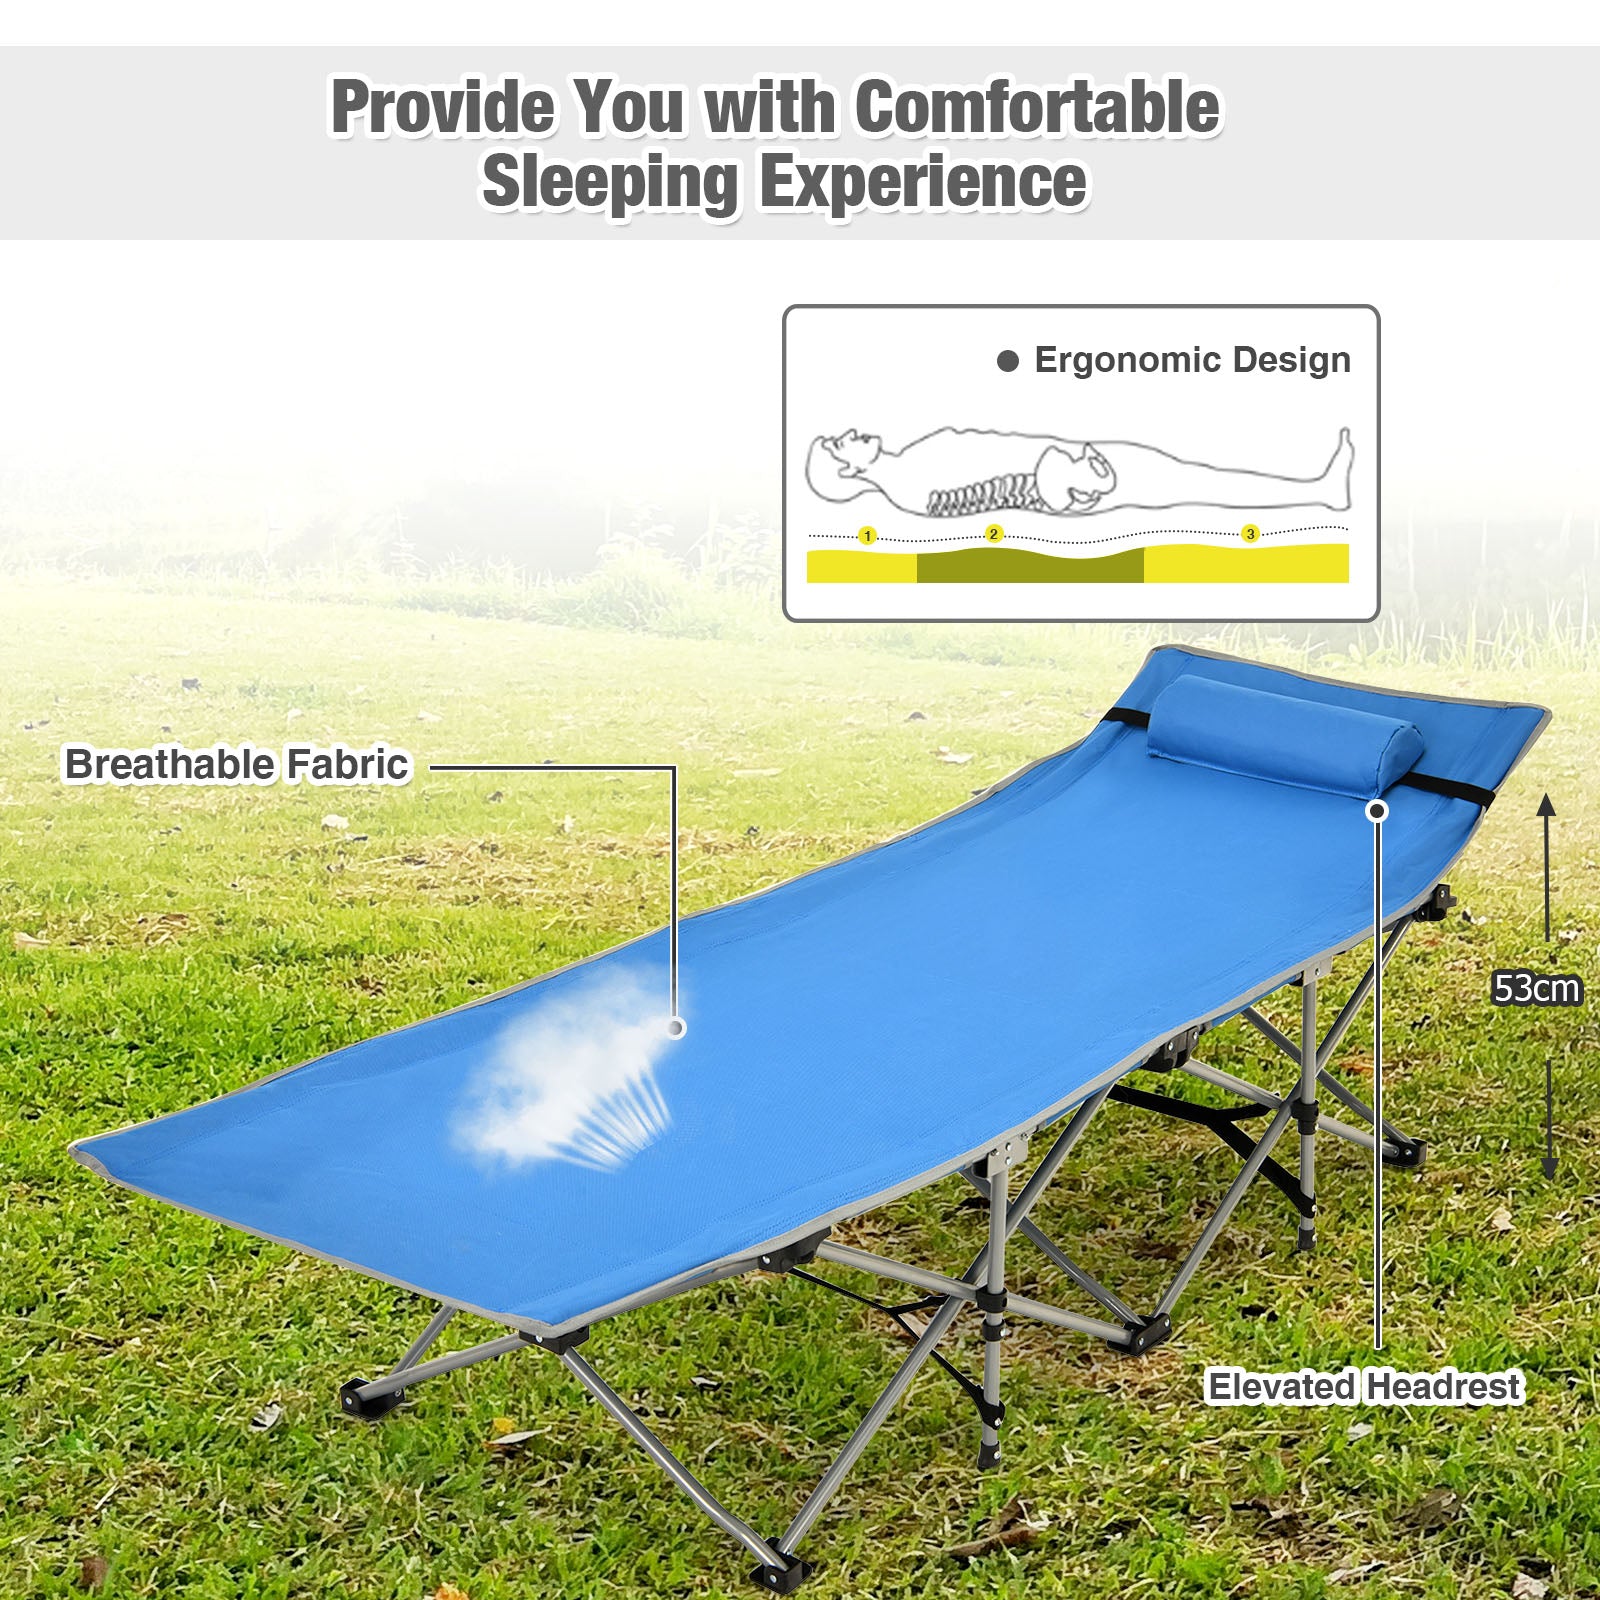 Folding Camping Cot with Detachable Headrest and Side Pocket-Blue